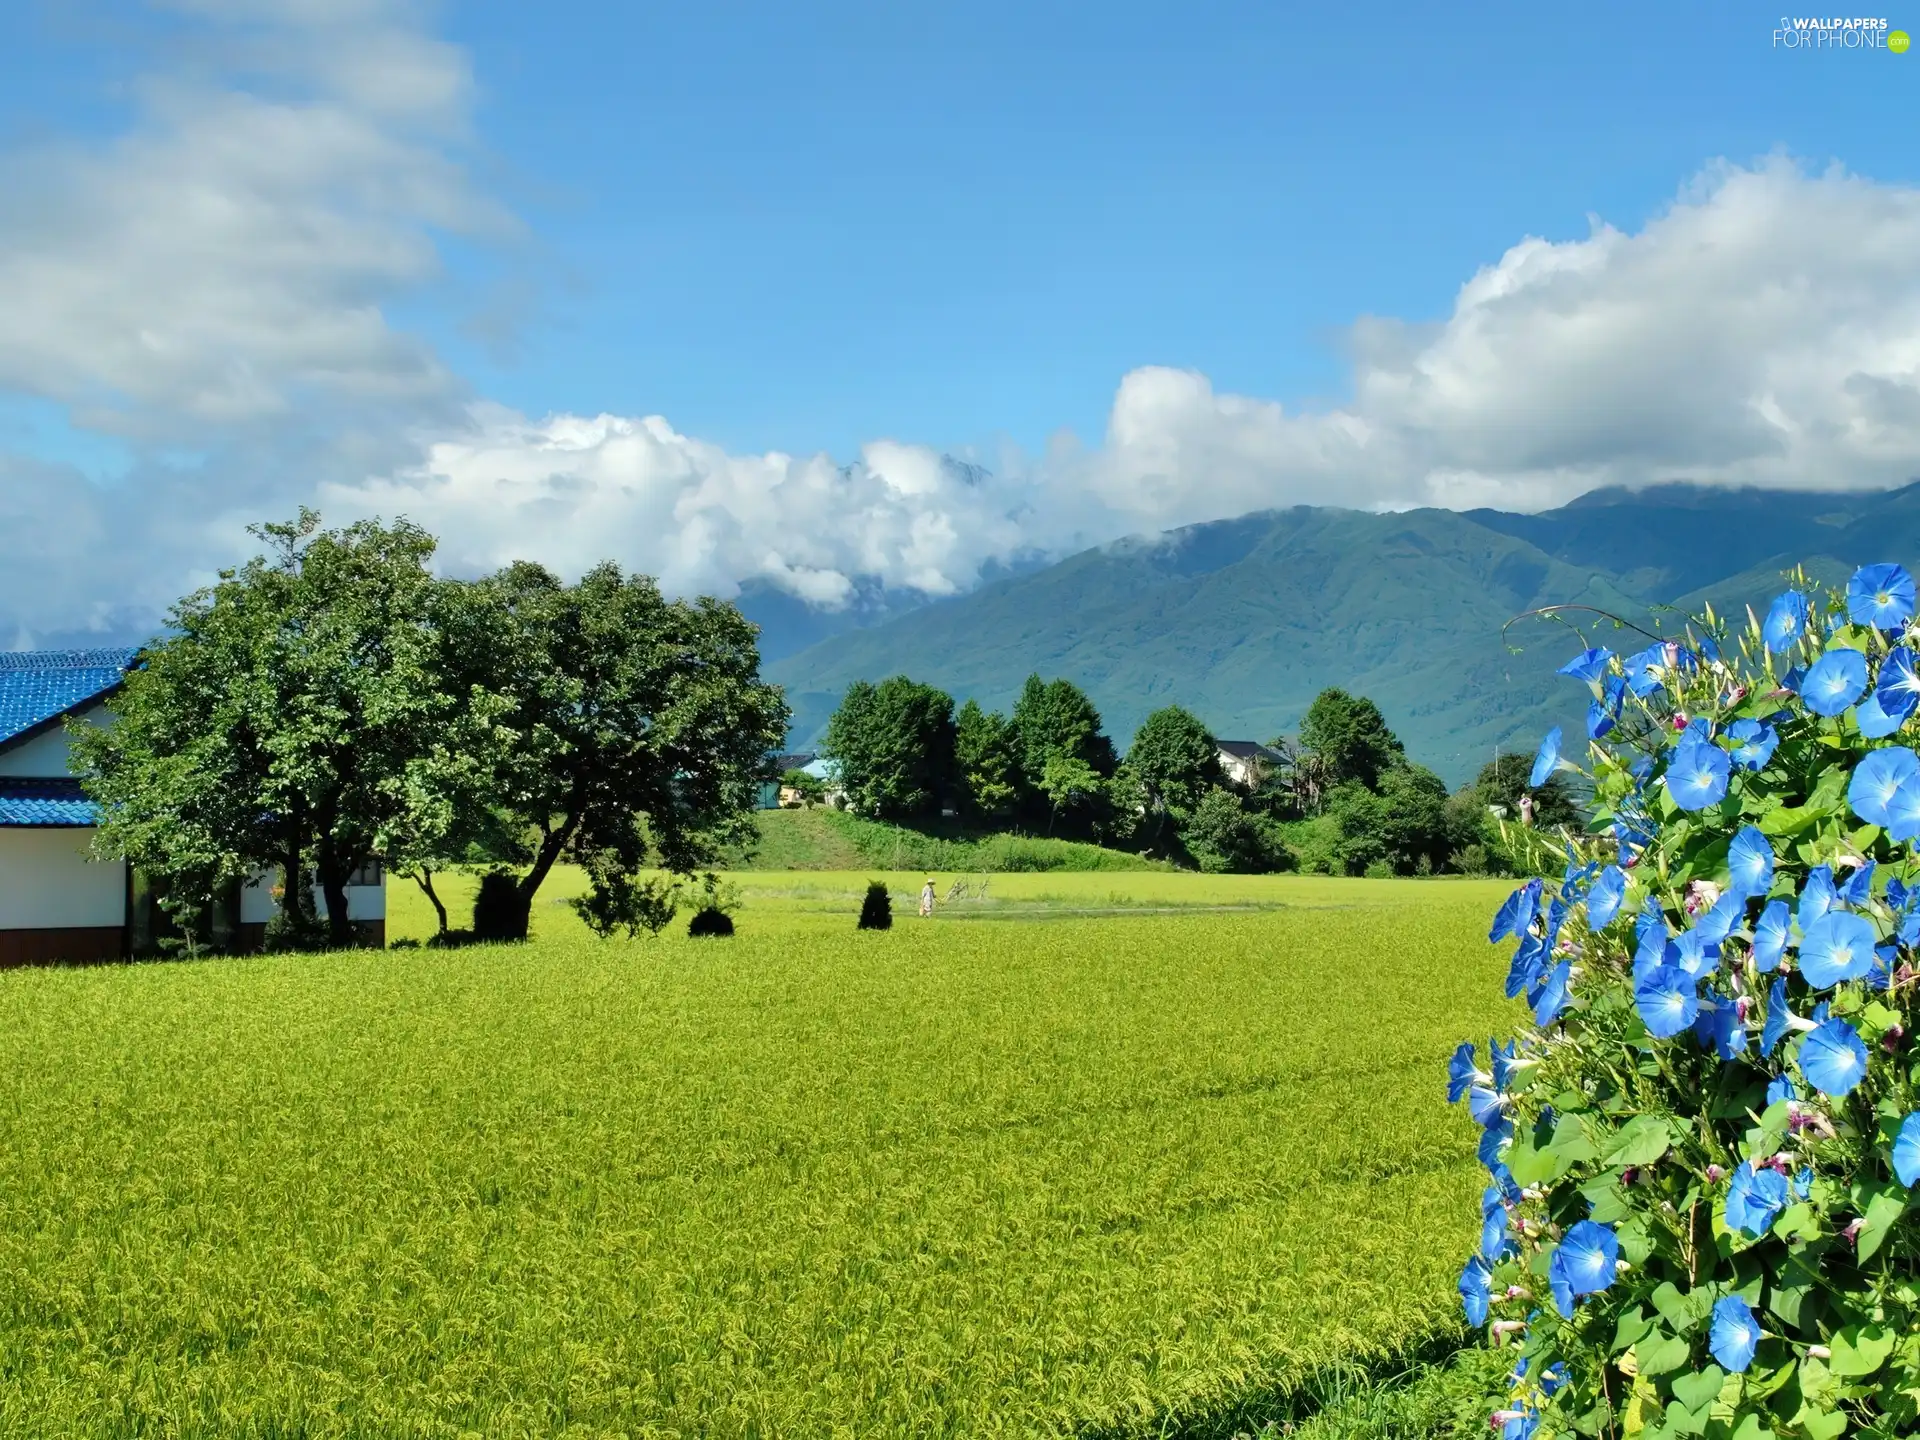 Blue, Flowers, Field, cereals, Mountains